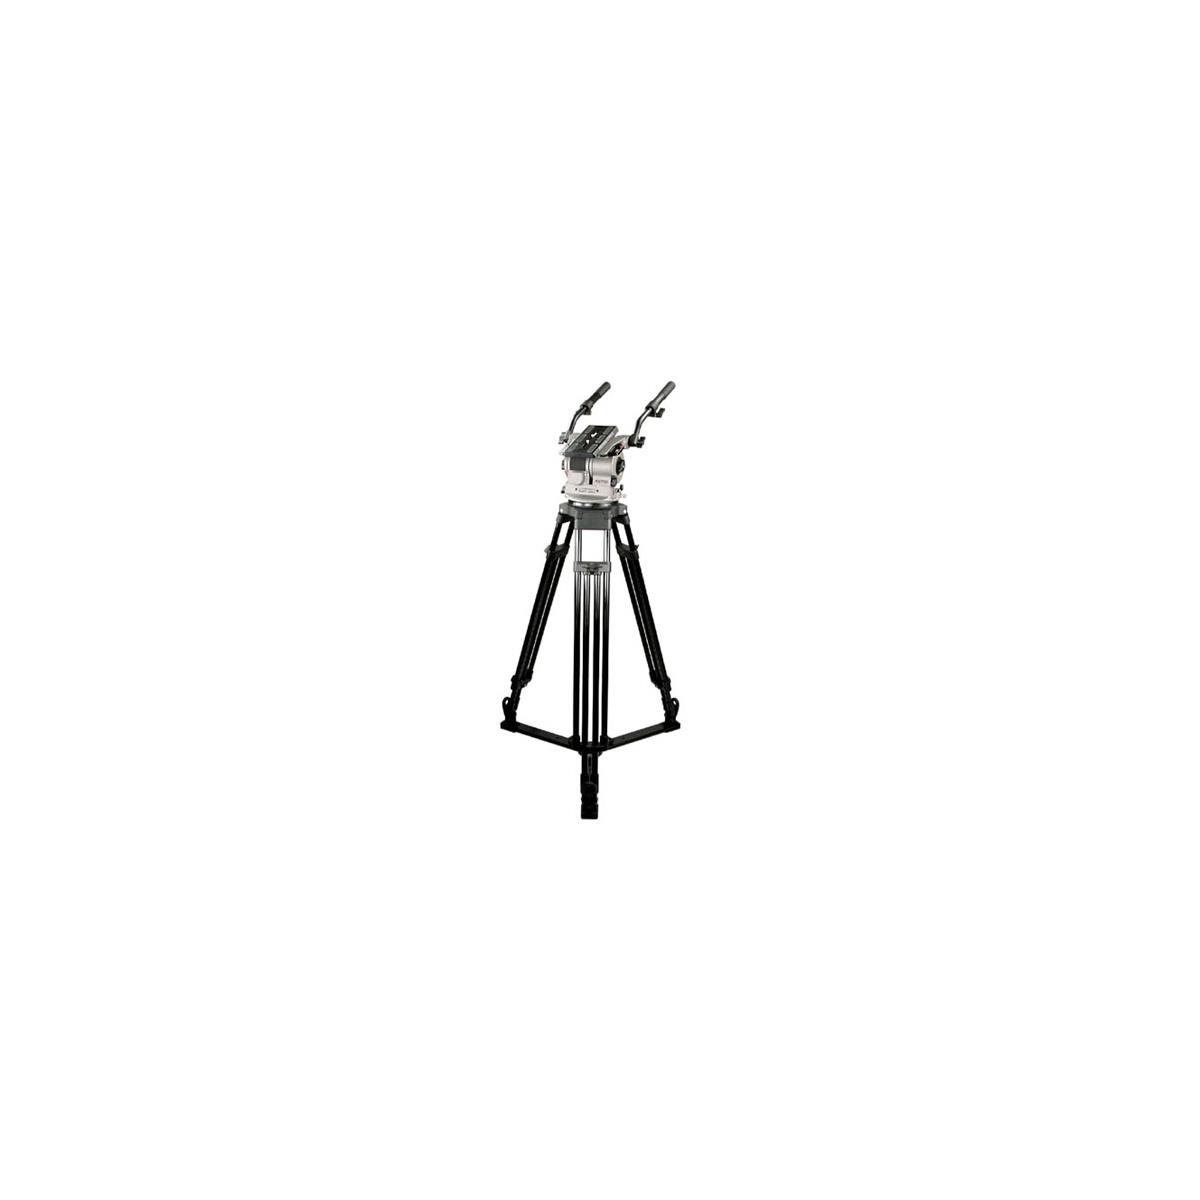 Image of Cartoni Master M110 Aluminum Tripod with Master Fluid Head and Ground Spreader